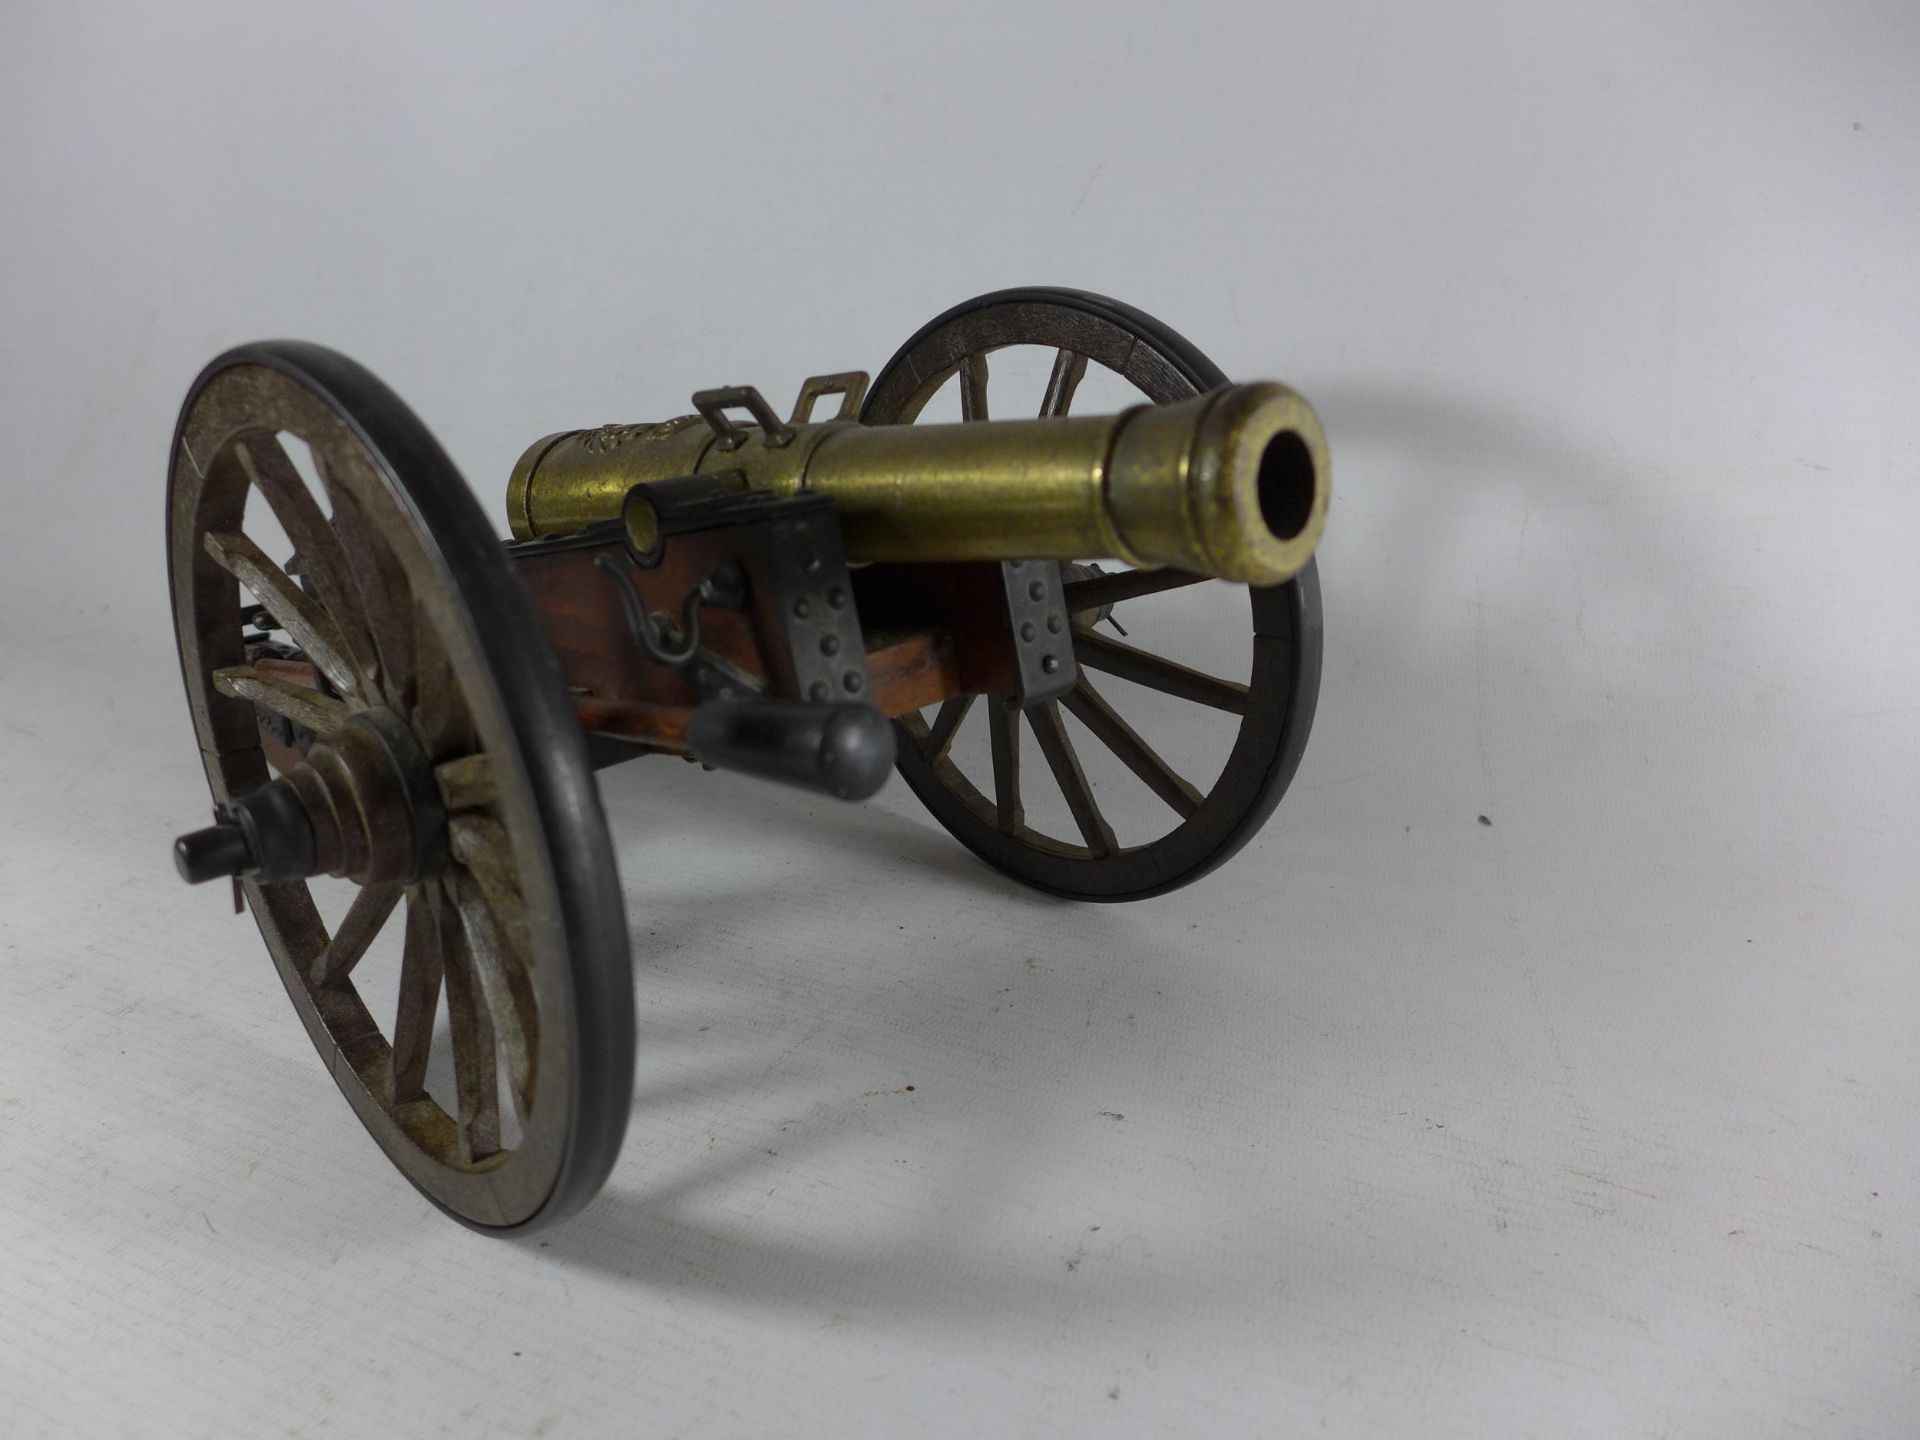 A MODEL OF A NAPOLEONIC WAR CANON, LENGTH 35CM - Image 4 of 4